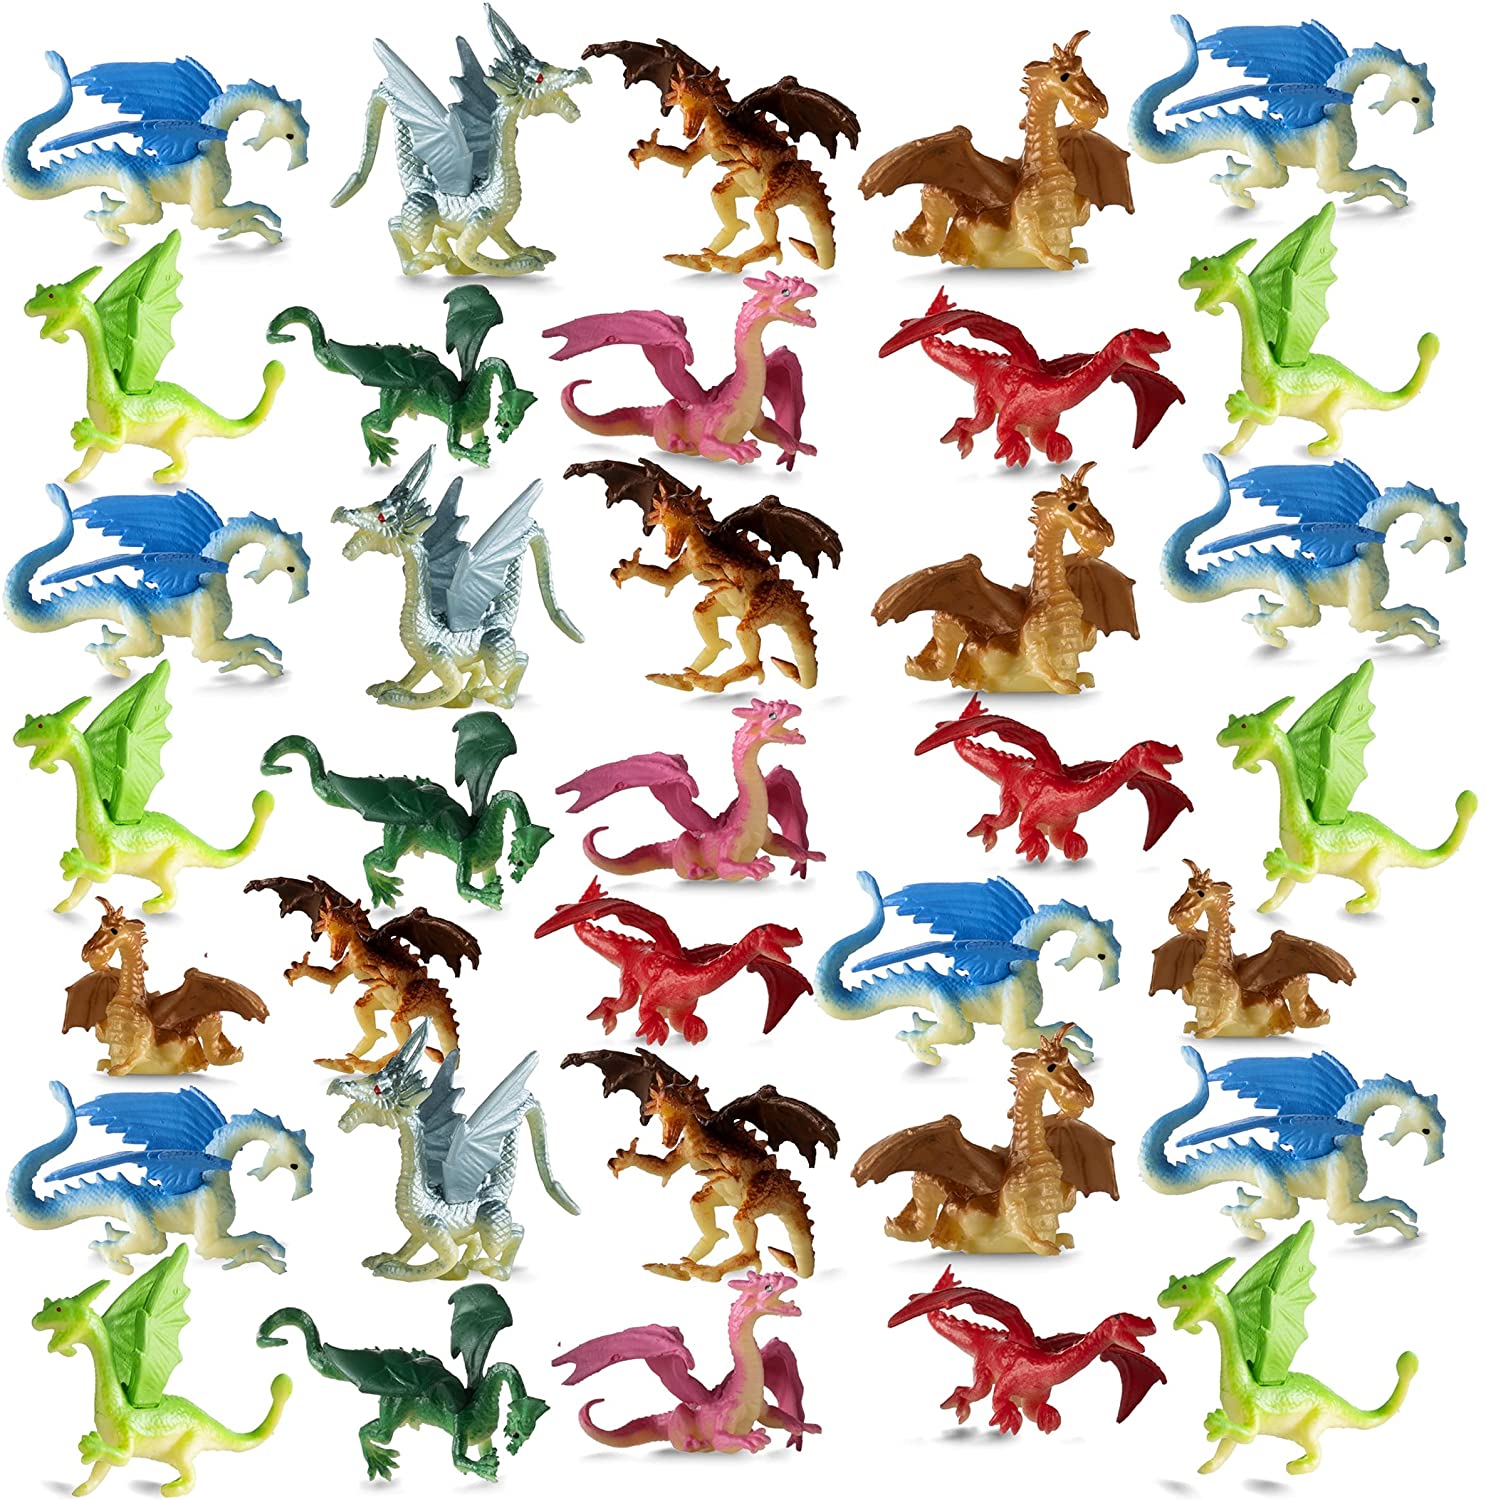 Mini Dragon Toy Figures - (Pack of 36) 2 Inch Plastic Rubbery Dragon  Figurines in Assorted Colors and Styles - Kids Toys for Birthday Party  Favors, Decorations, Cupcake Toppers and Piñatas 